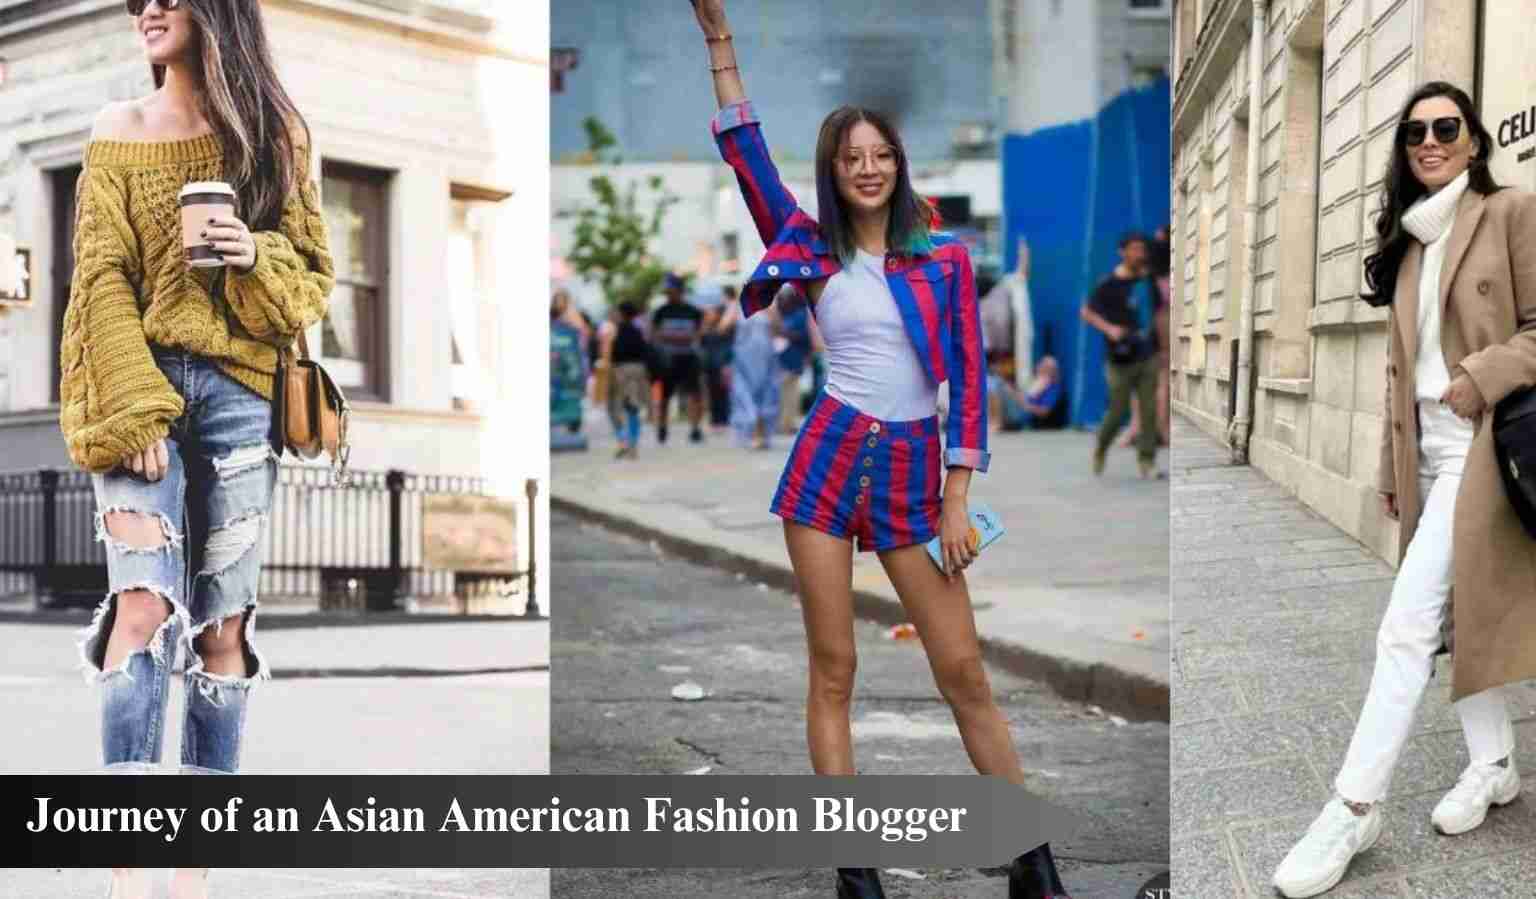 Amplifying Style: The Journey of an Asian American Fashion Blogger